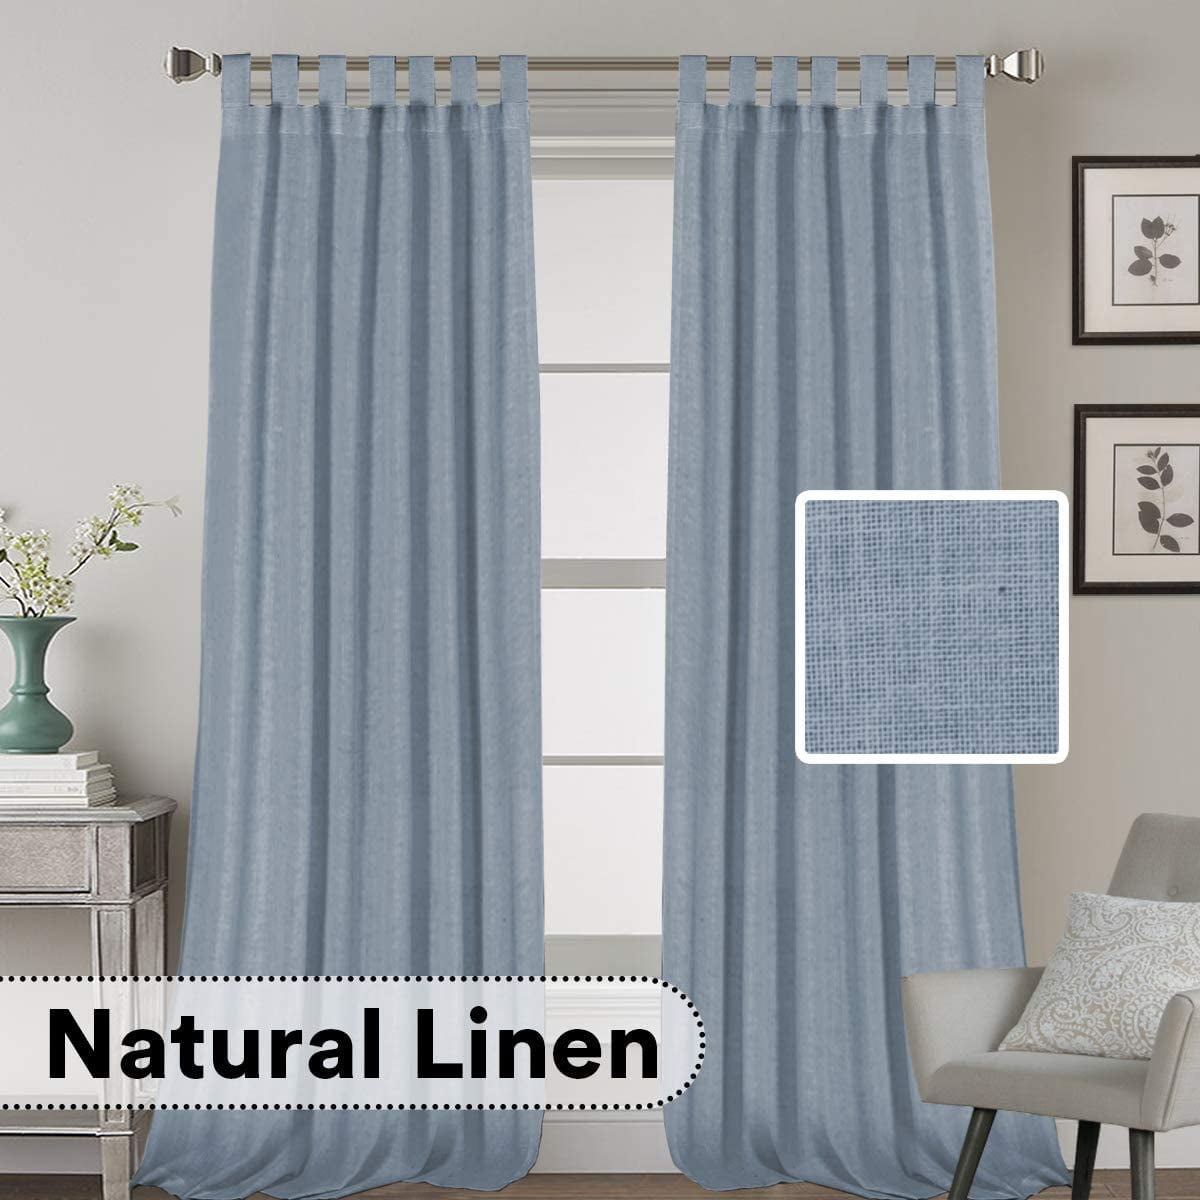 Linen Curtains Natural Linen Blended Curtains Tab Top Window Treatments